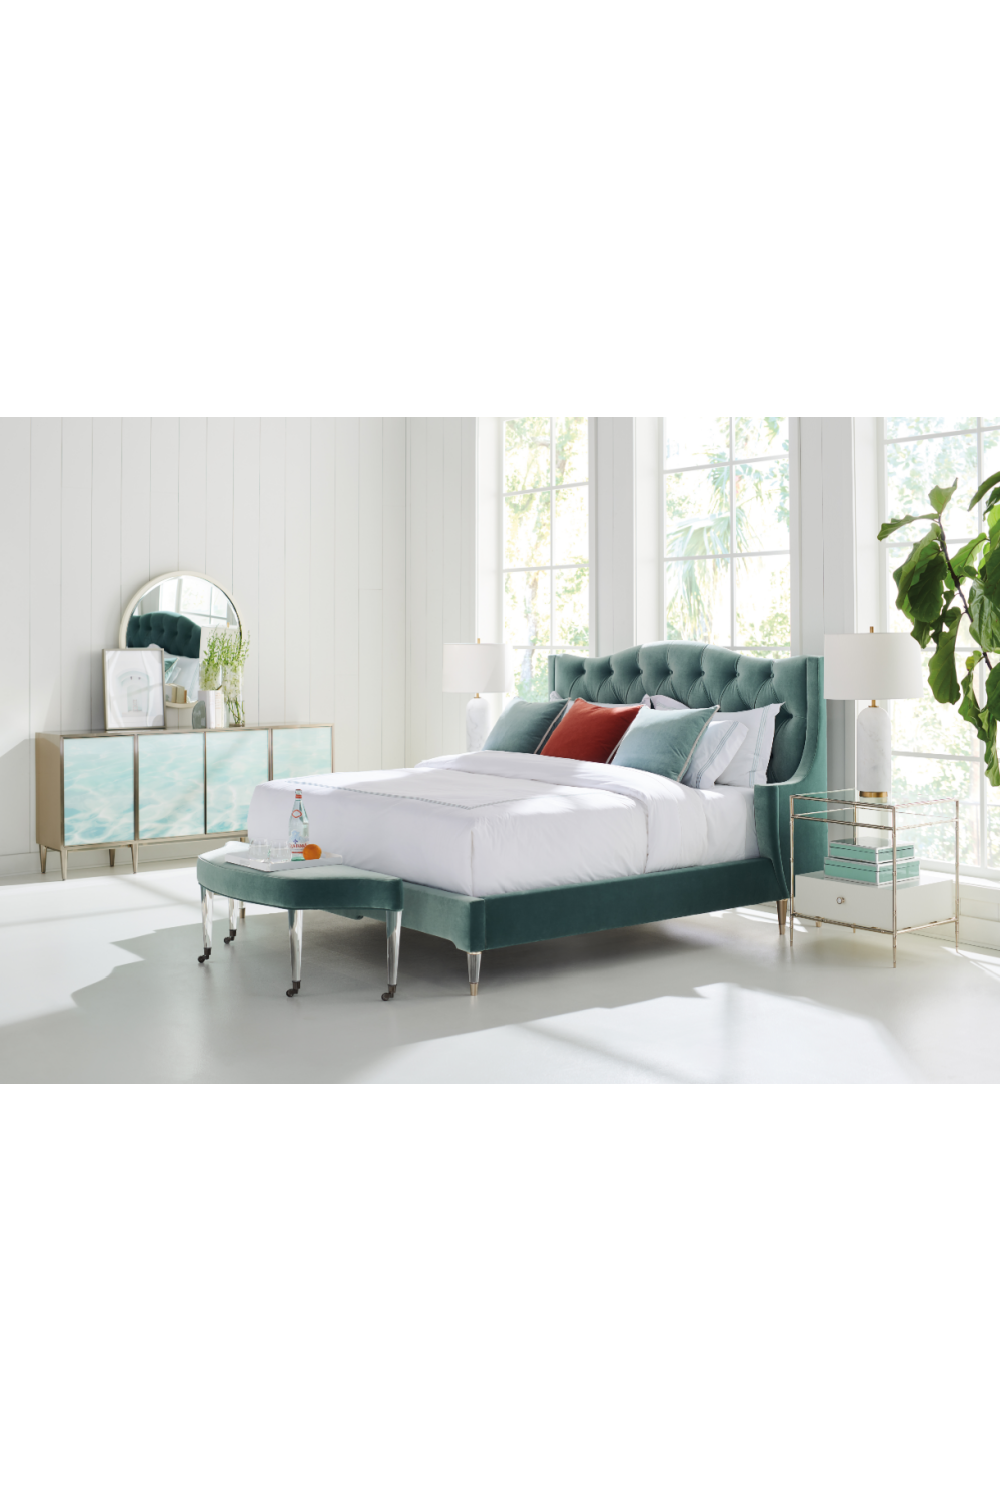 Blue Upholstered Tufted California King Bed | Caracole Do Not Disturb | Oroa.com